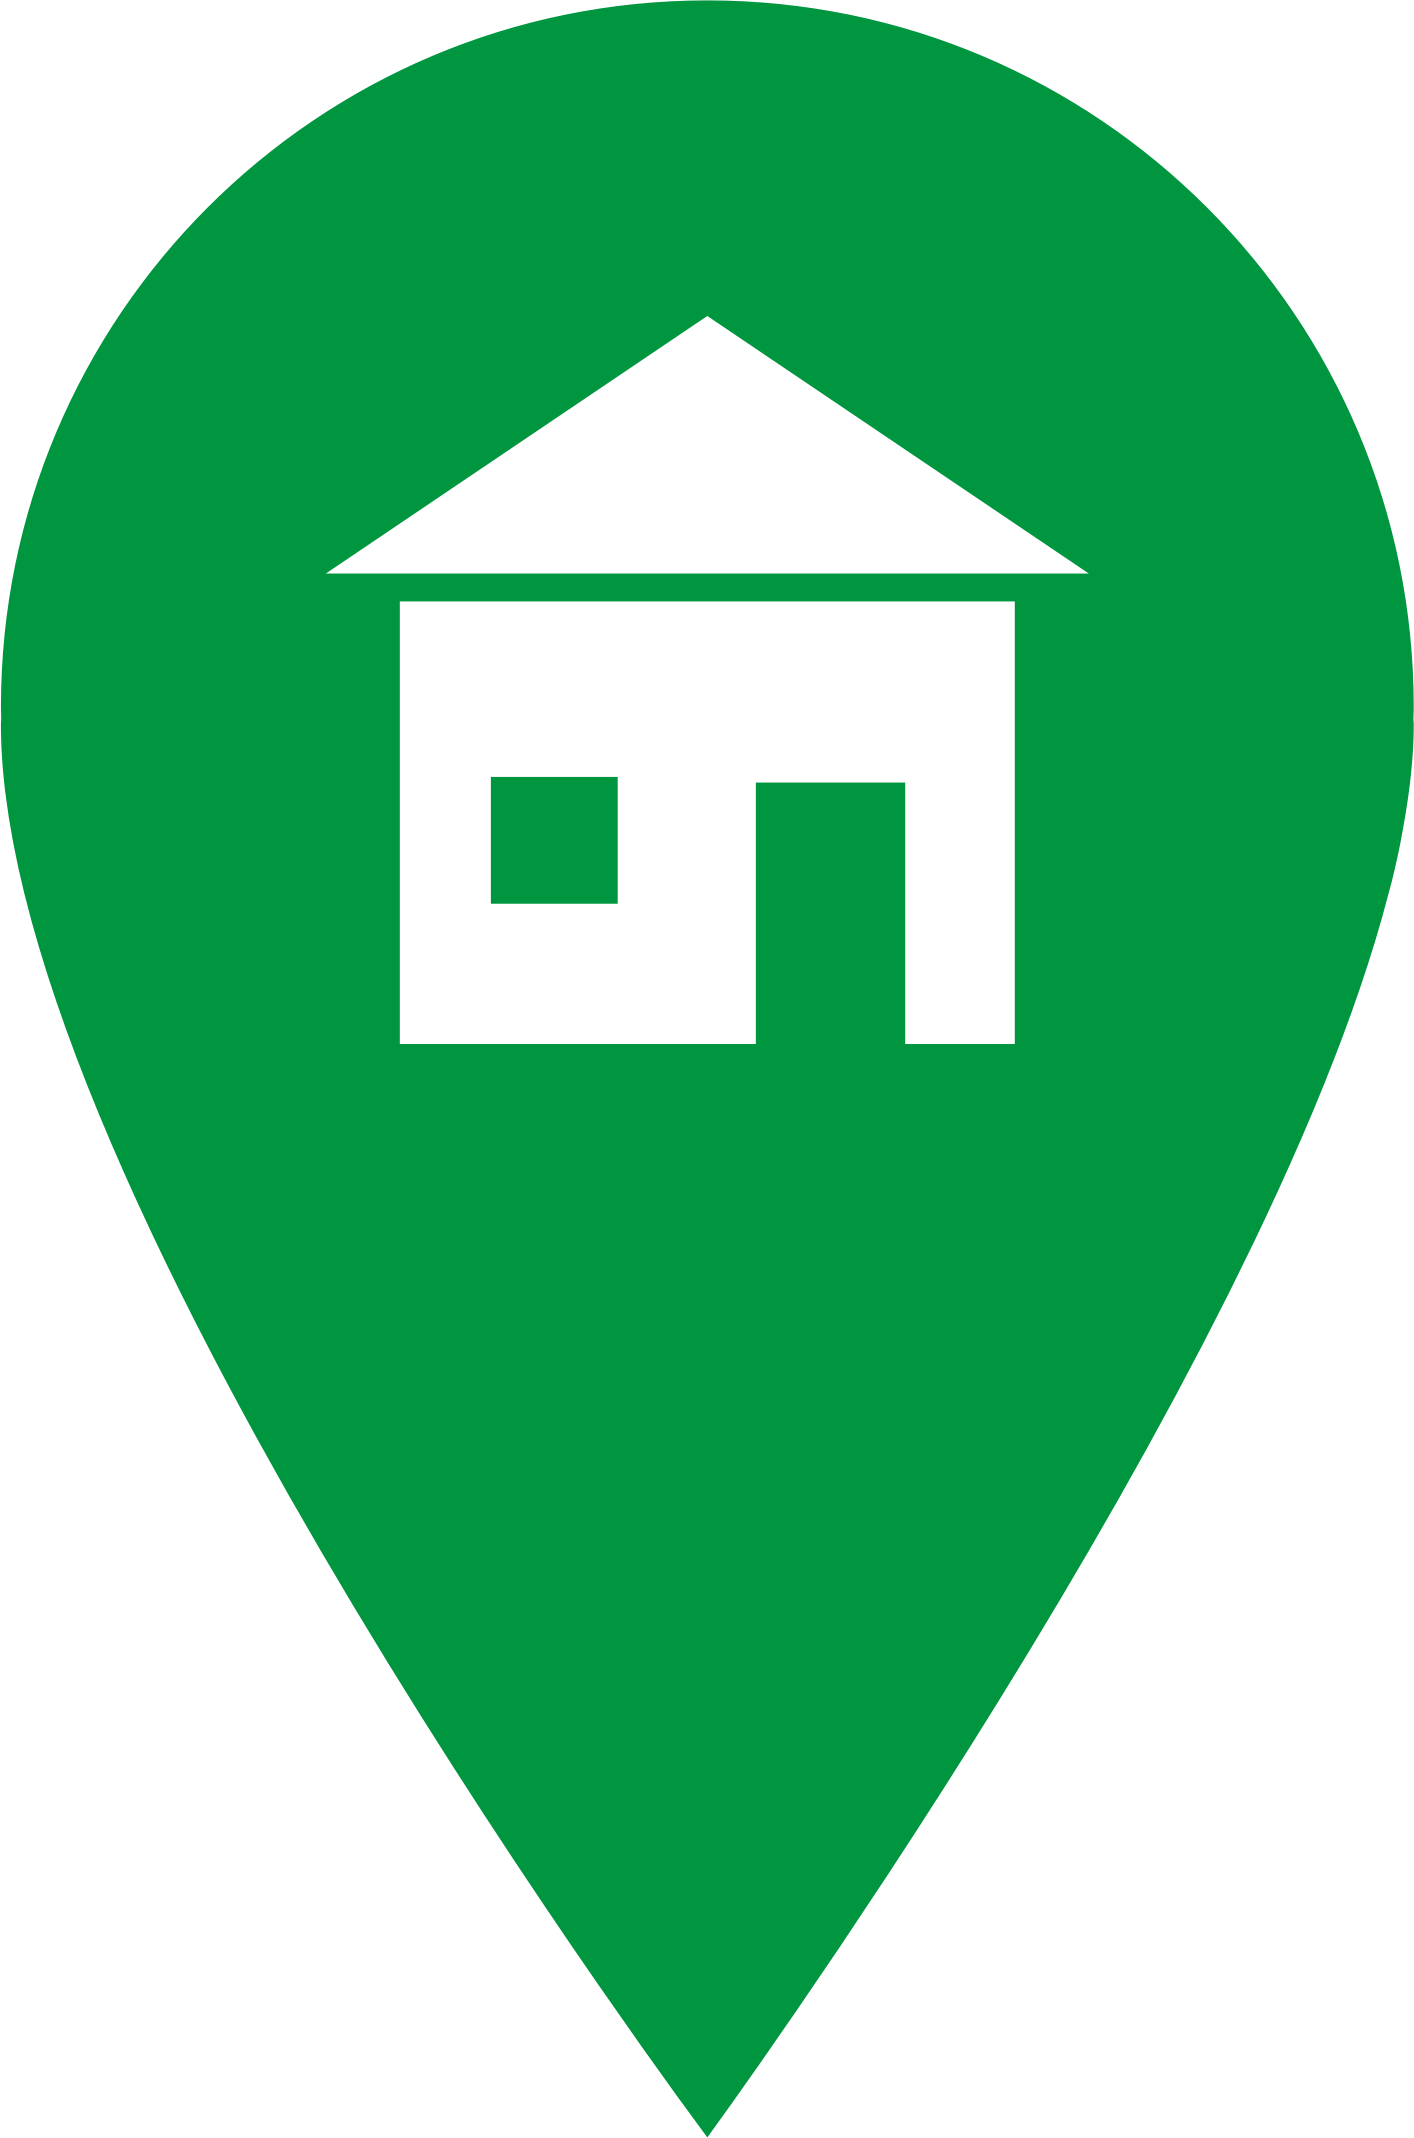 Building, home, house icon | Icon search engine